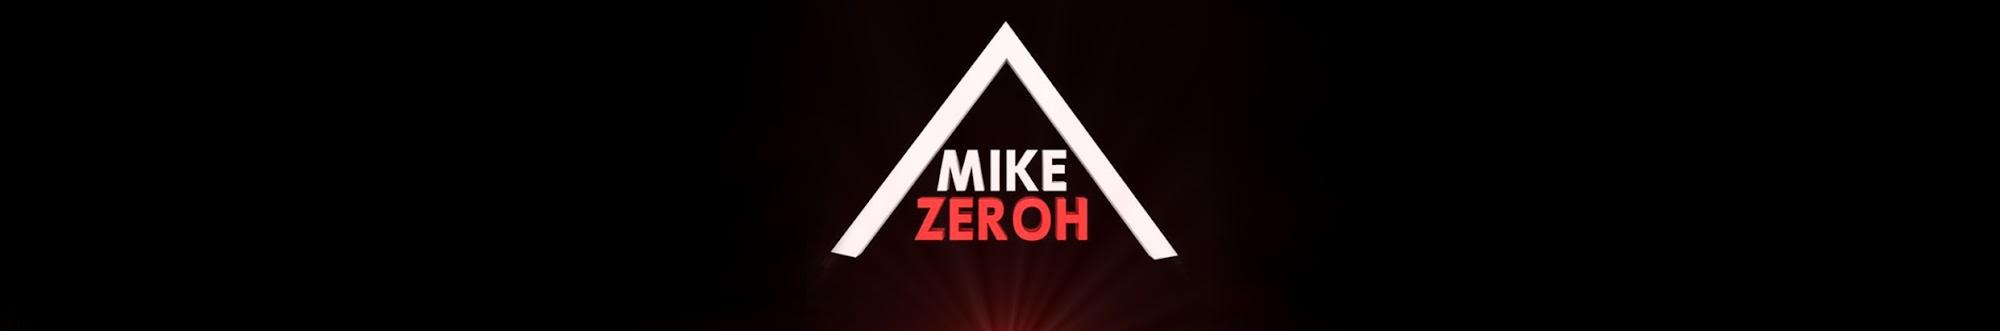 MIKE ZEROH